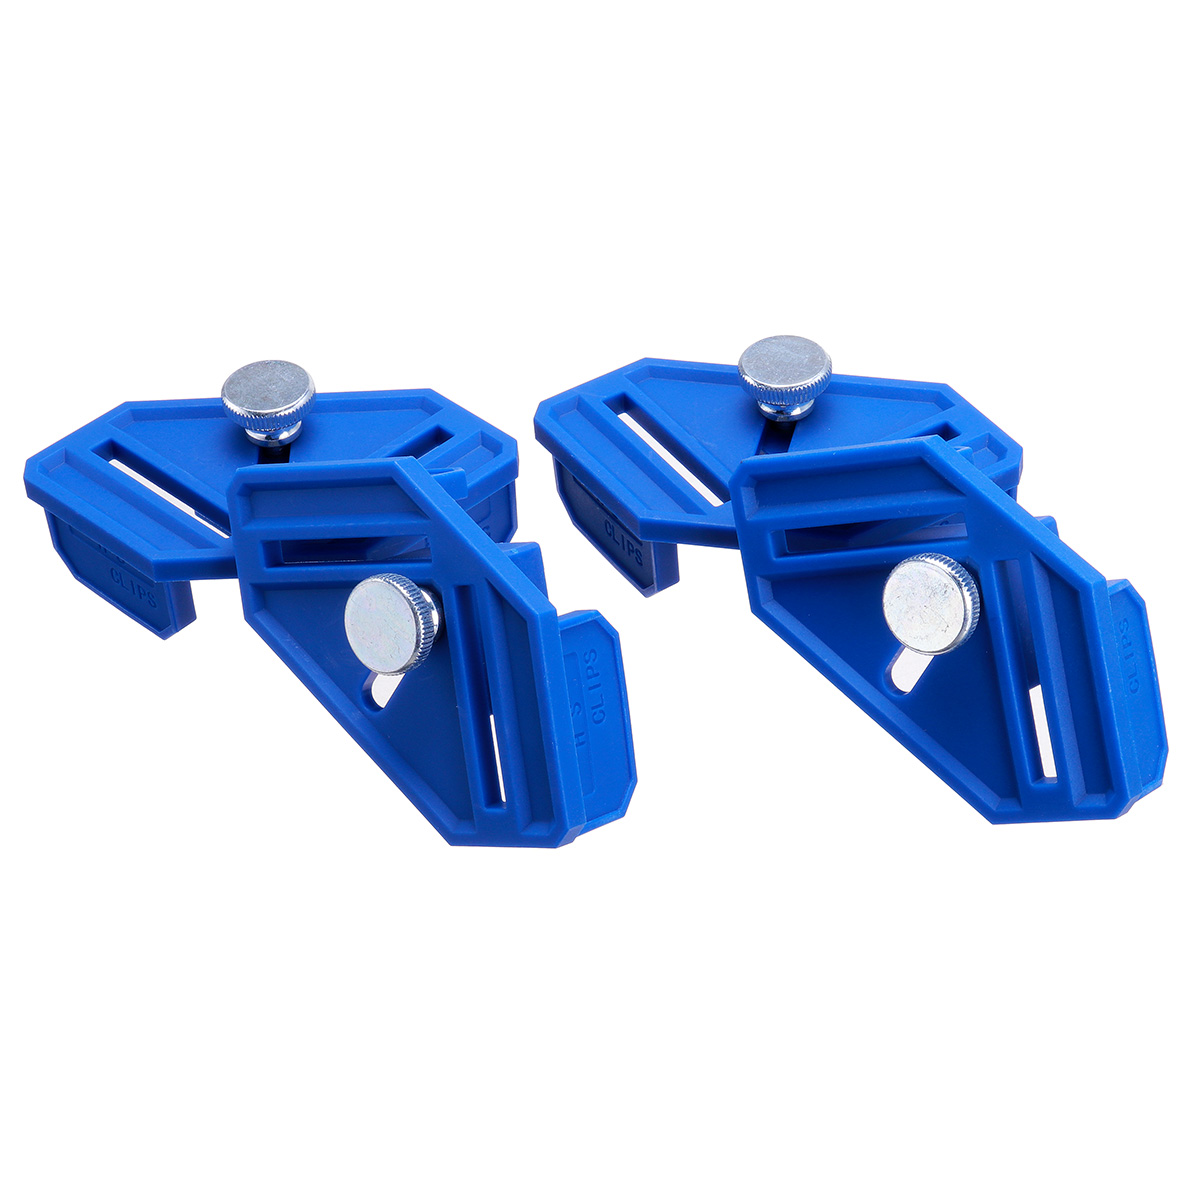 4pcs-Adjustable-Right-Angle-Positioning-Clamp-767642mm-Woodworking-Corner-Clamp-Right-Clips-DIY-Fixt-1889370-1